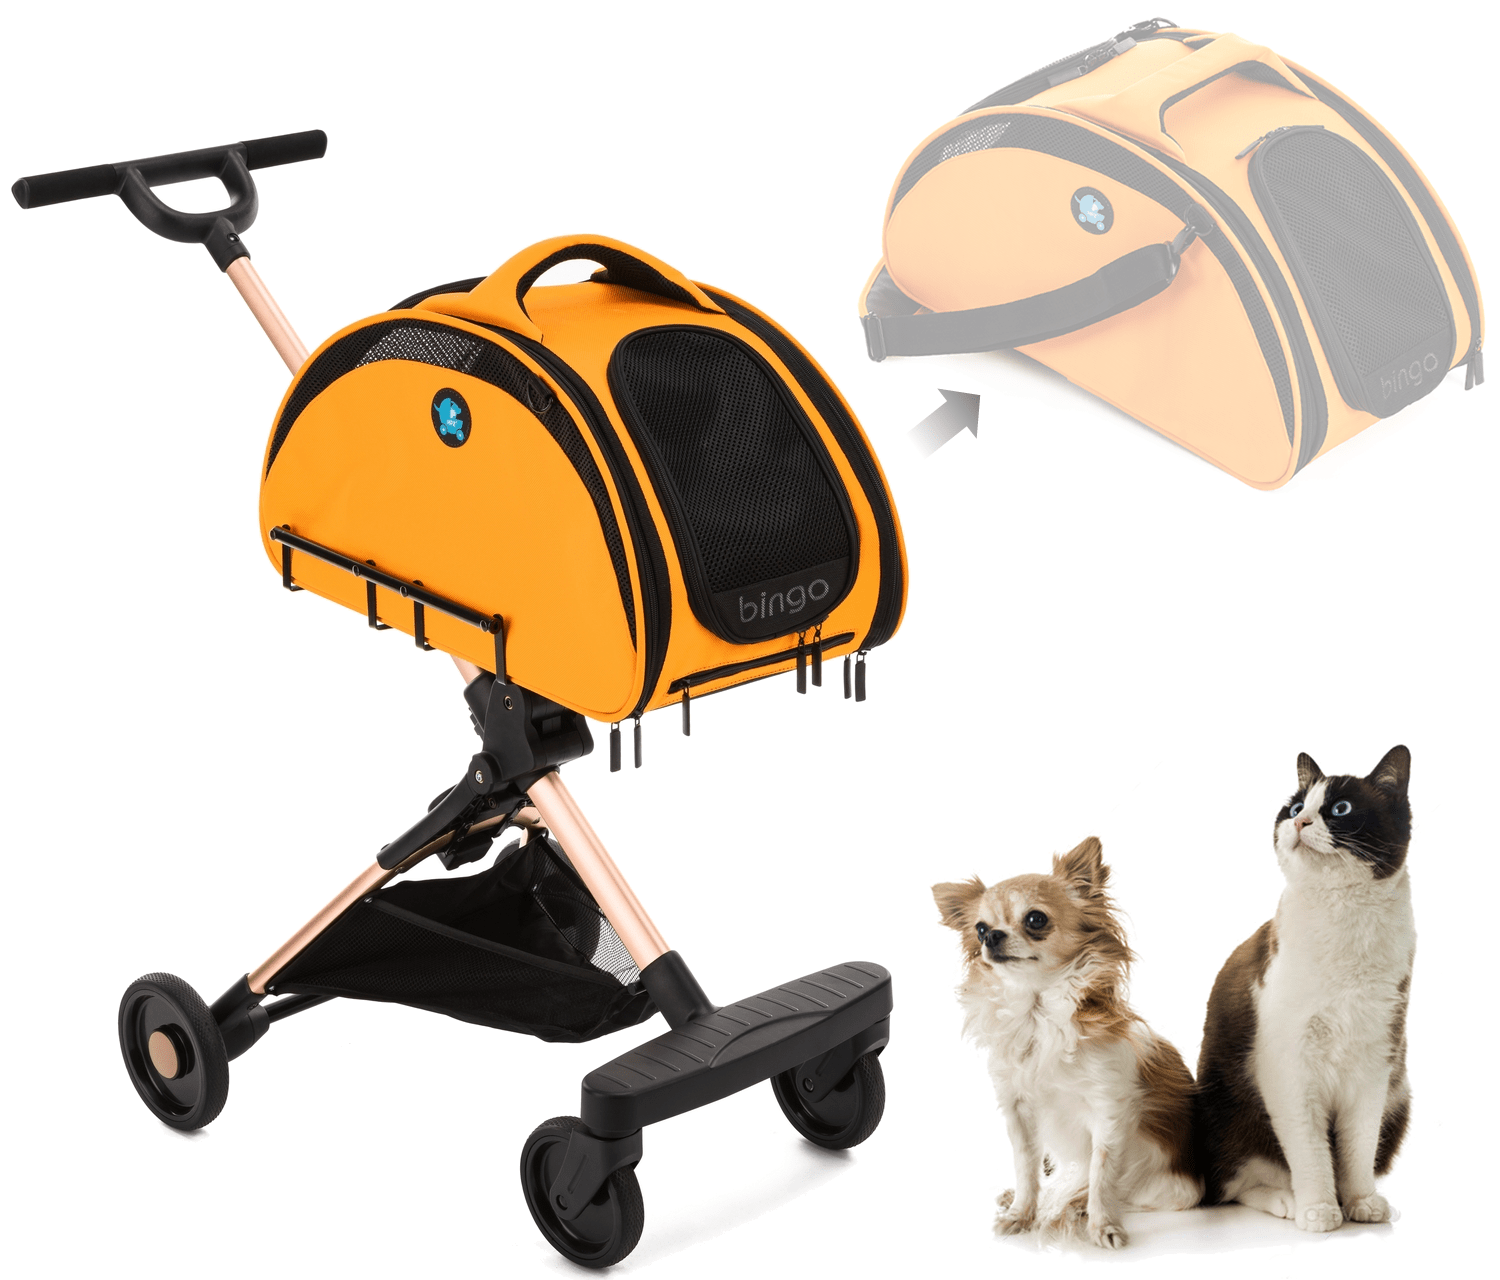 Deluxe Backpack Pet Travel Carrier with Wheels - Approved by Most